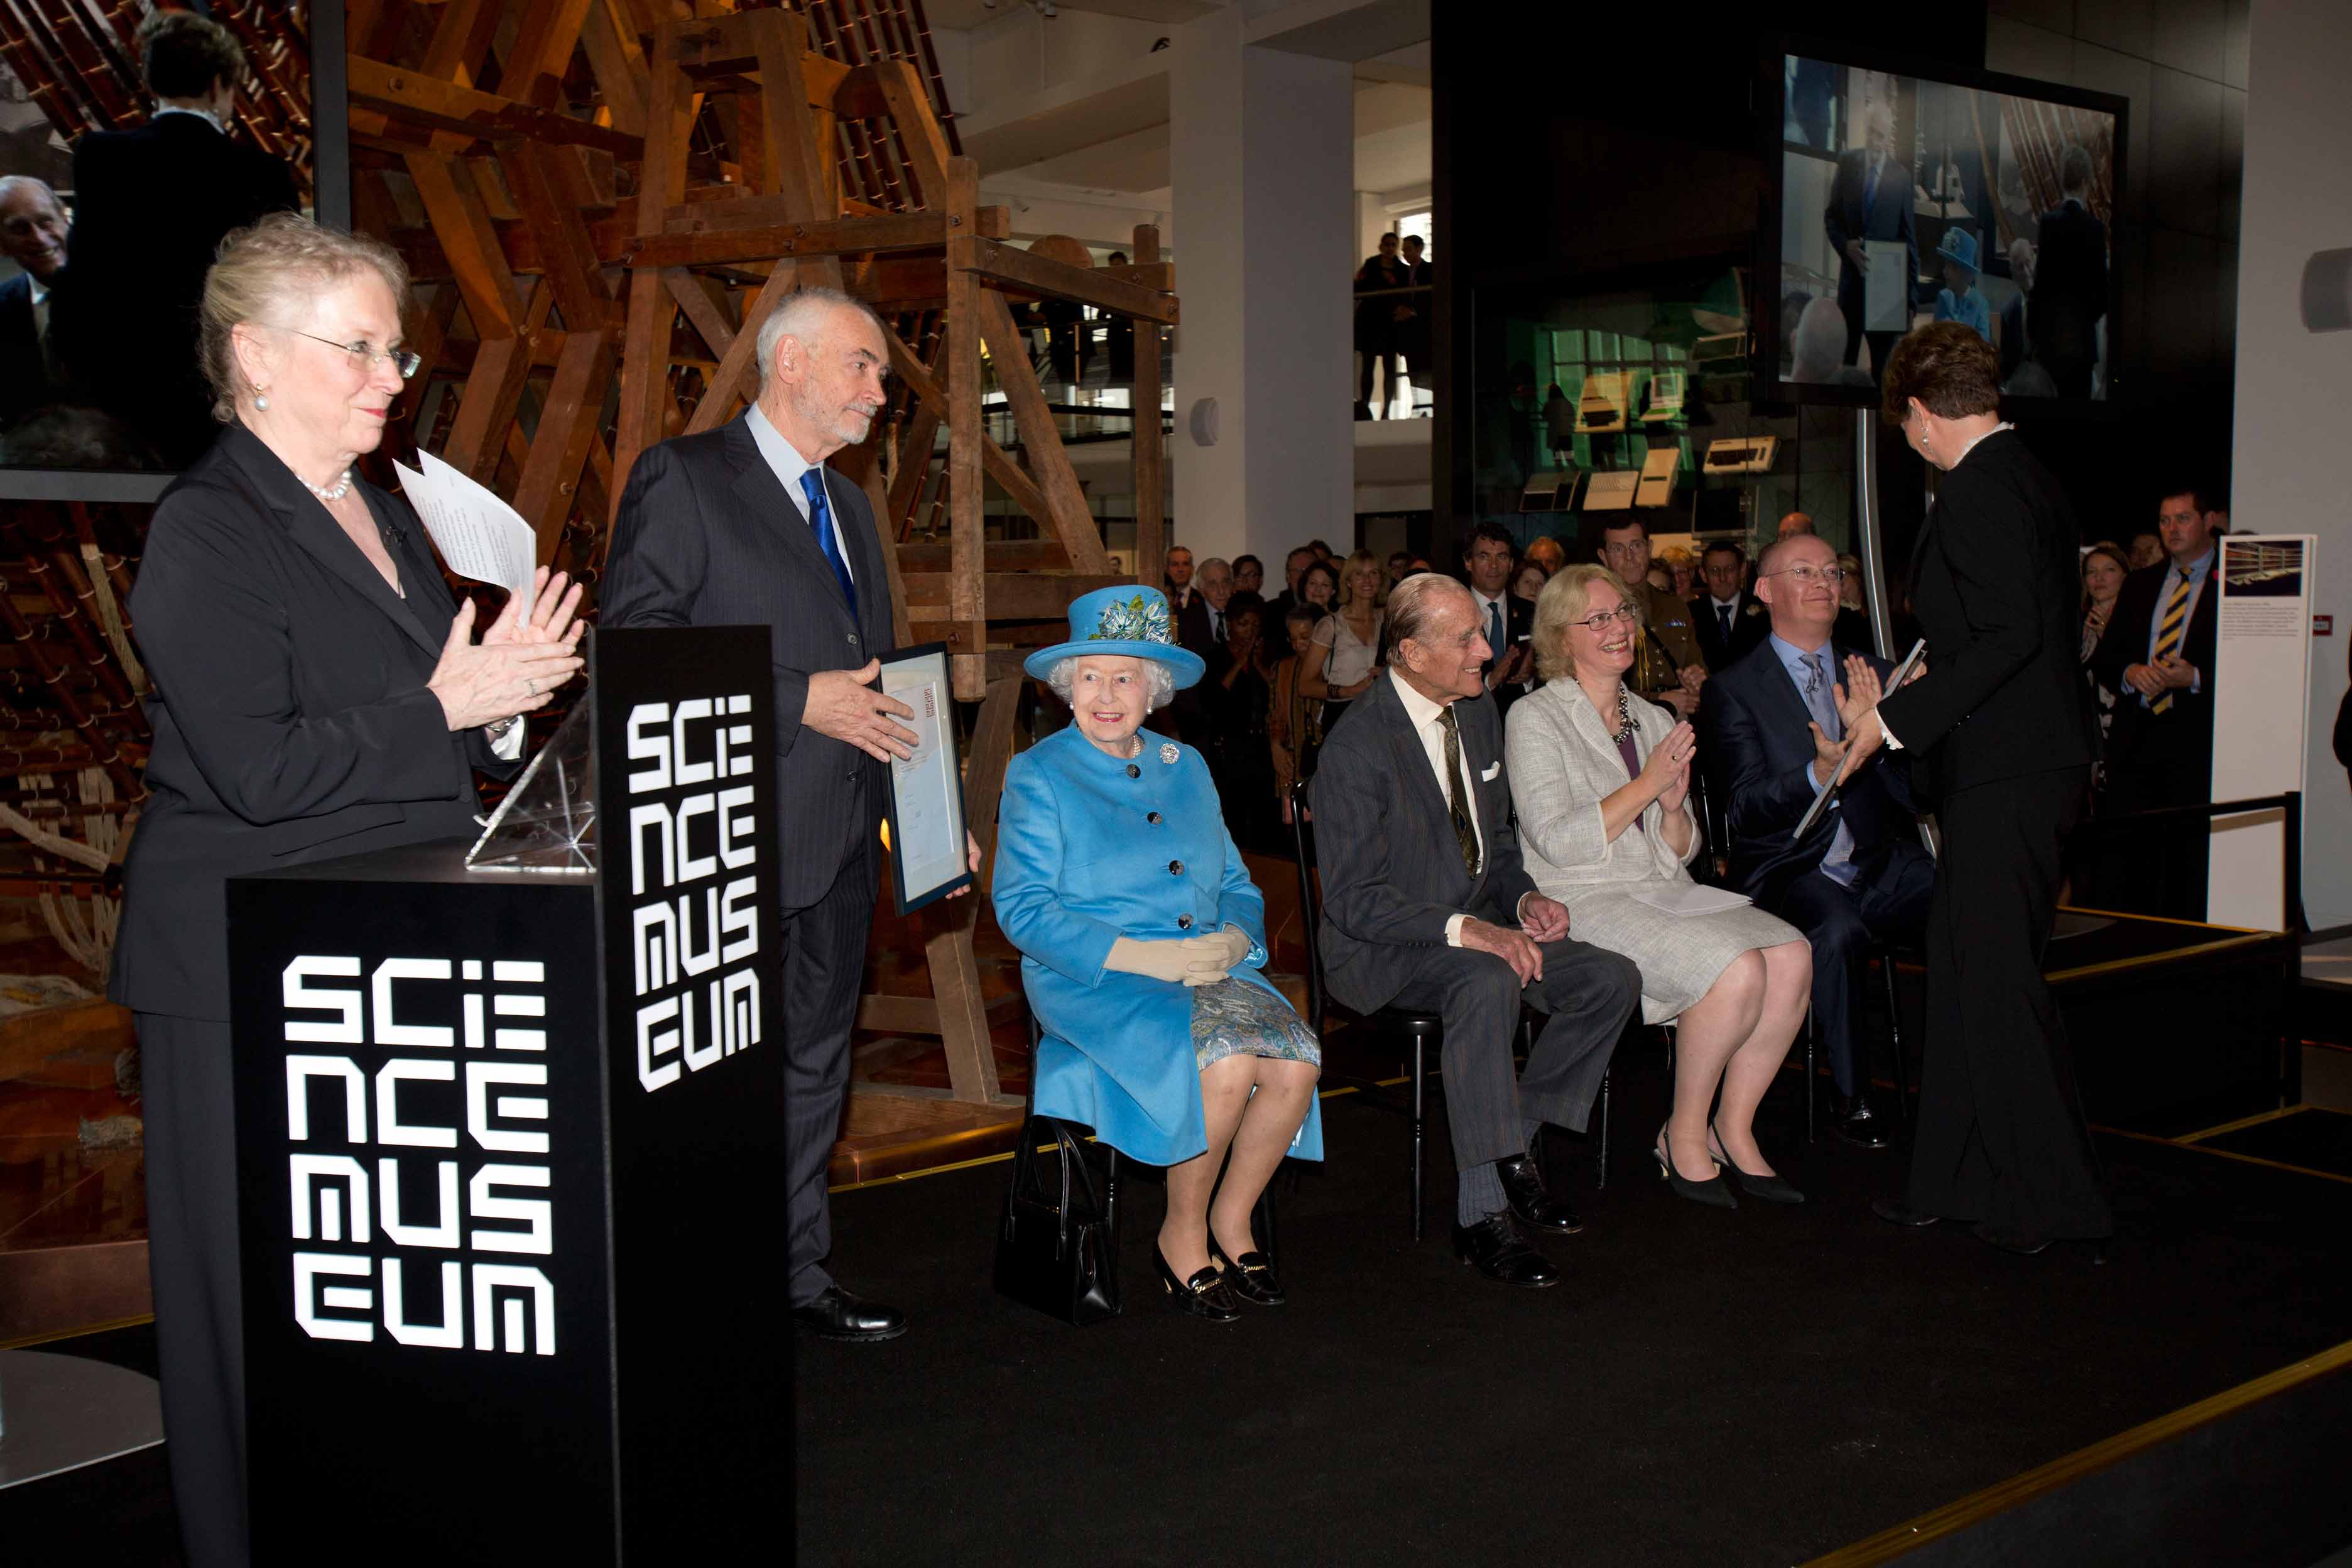 The Queen is presented with a Science Museum Fellowship at the opening of the Information Age gallery. Image credit: Tim Anderson